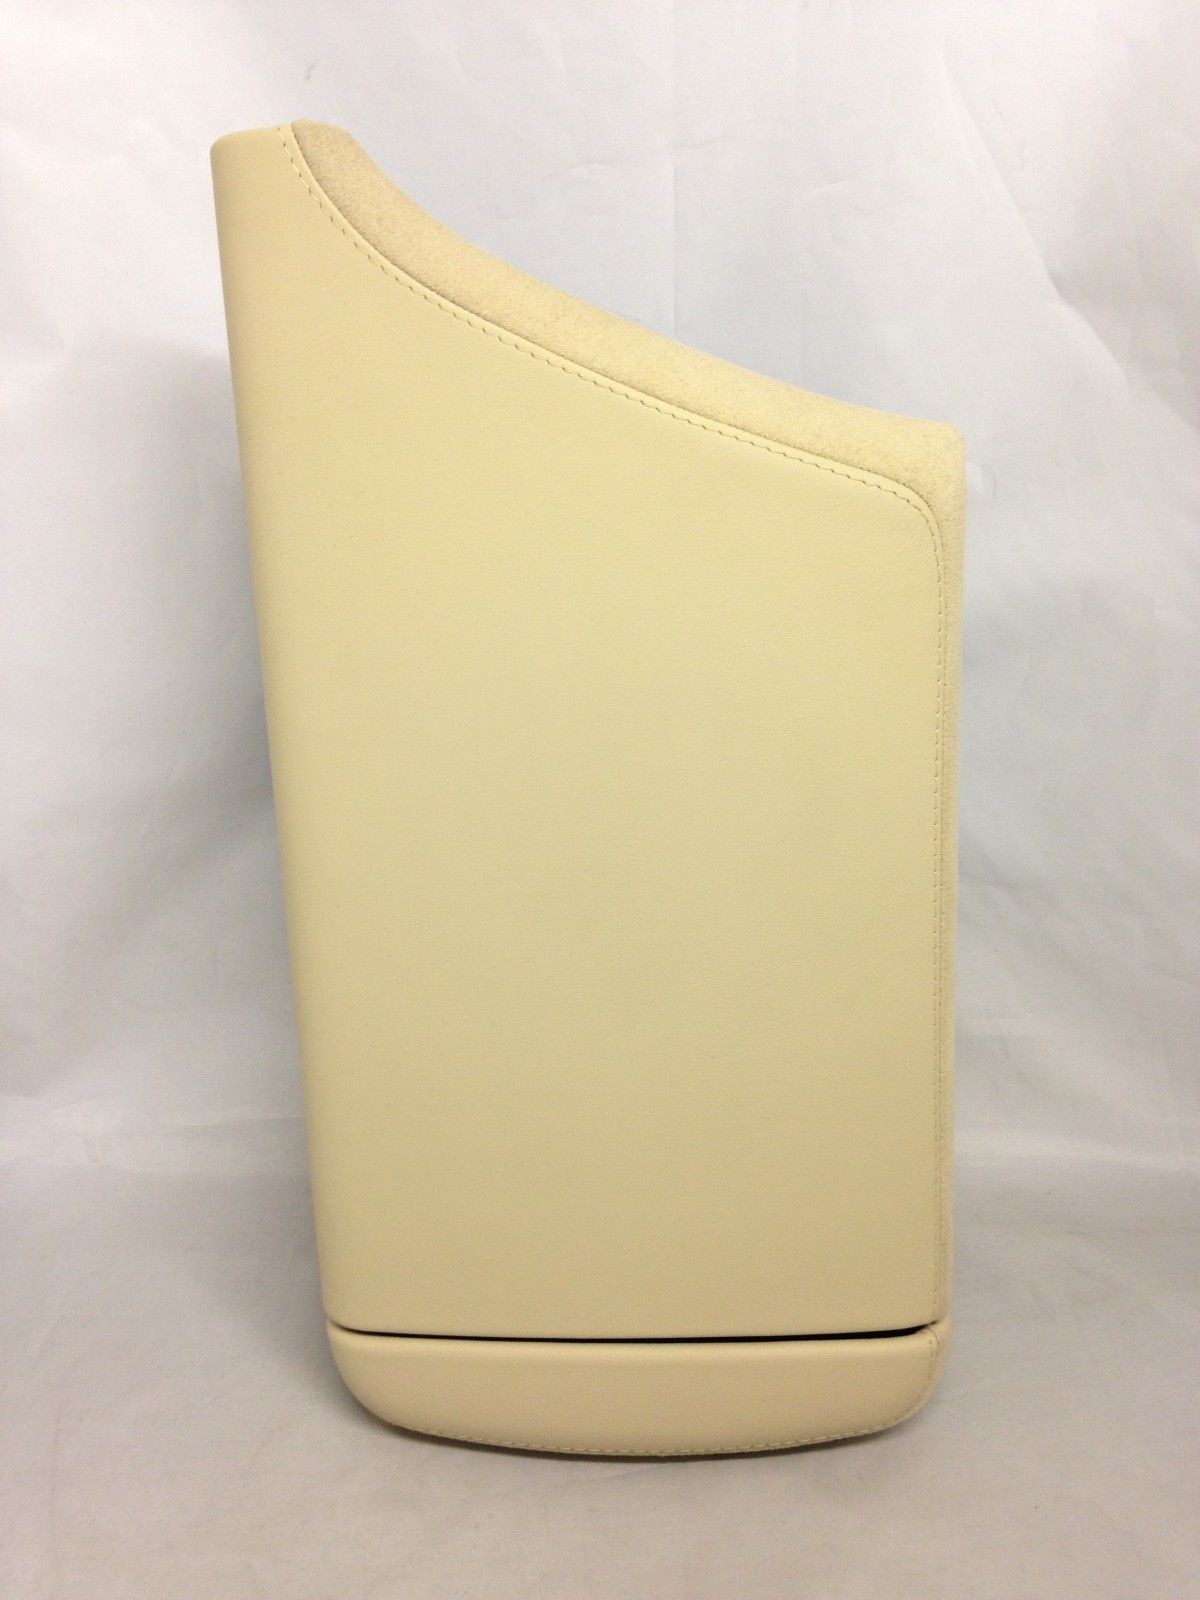 Cadillac CTS 2014+ center console lid leather suede cream NEW